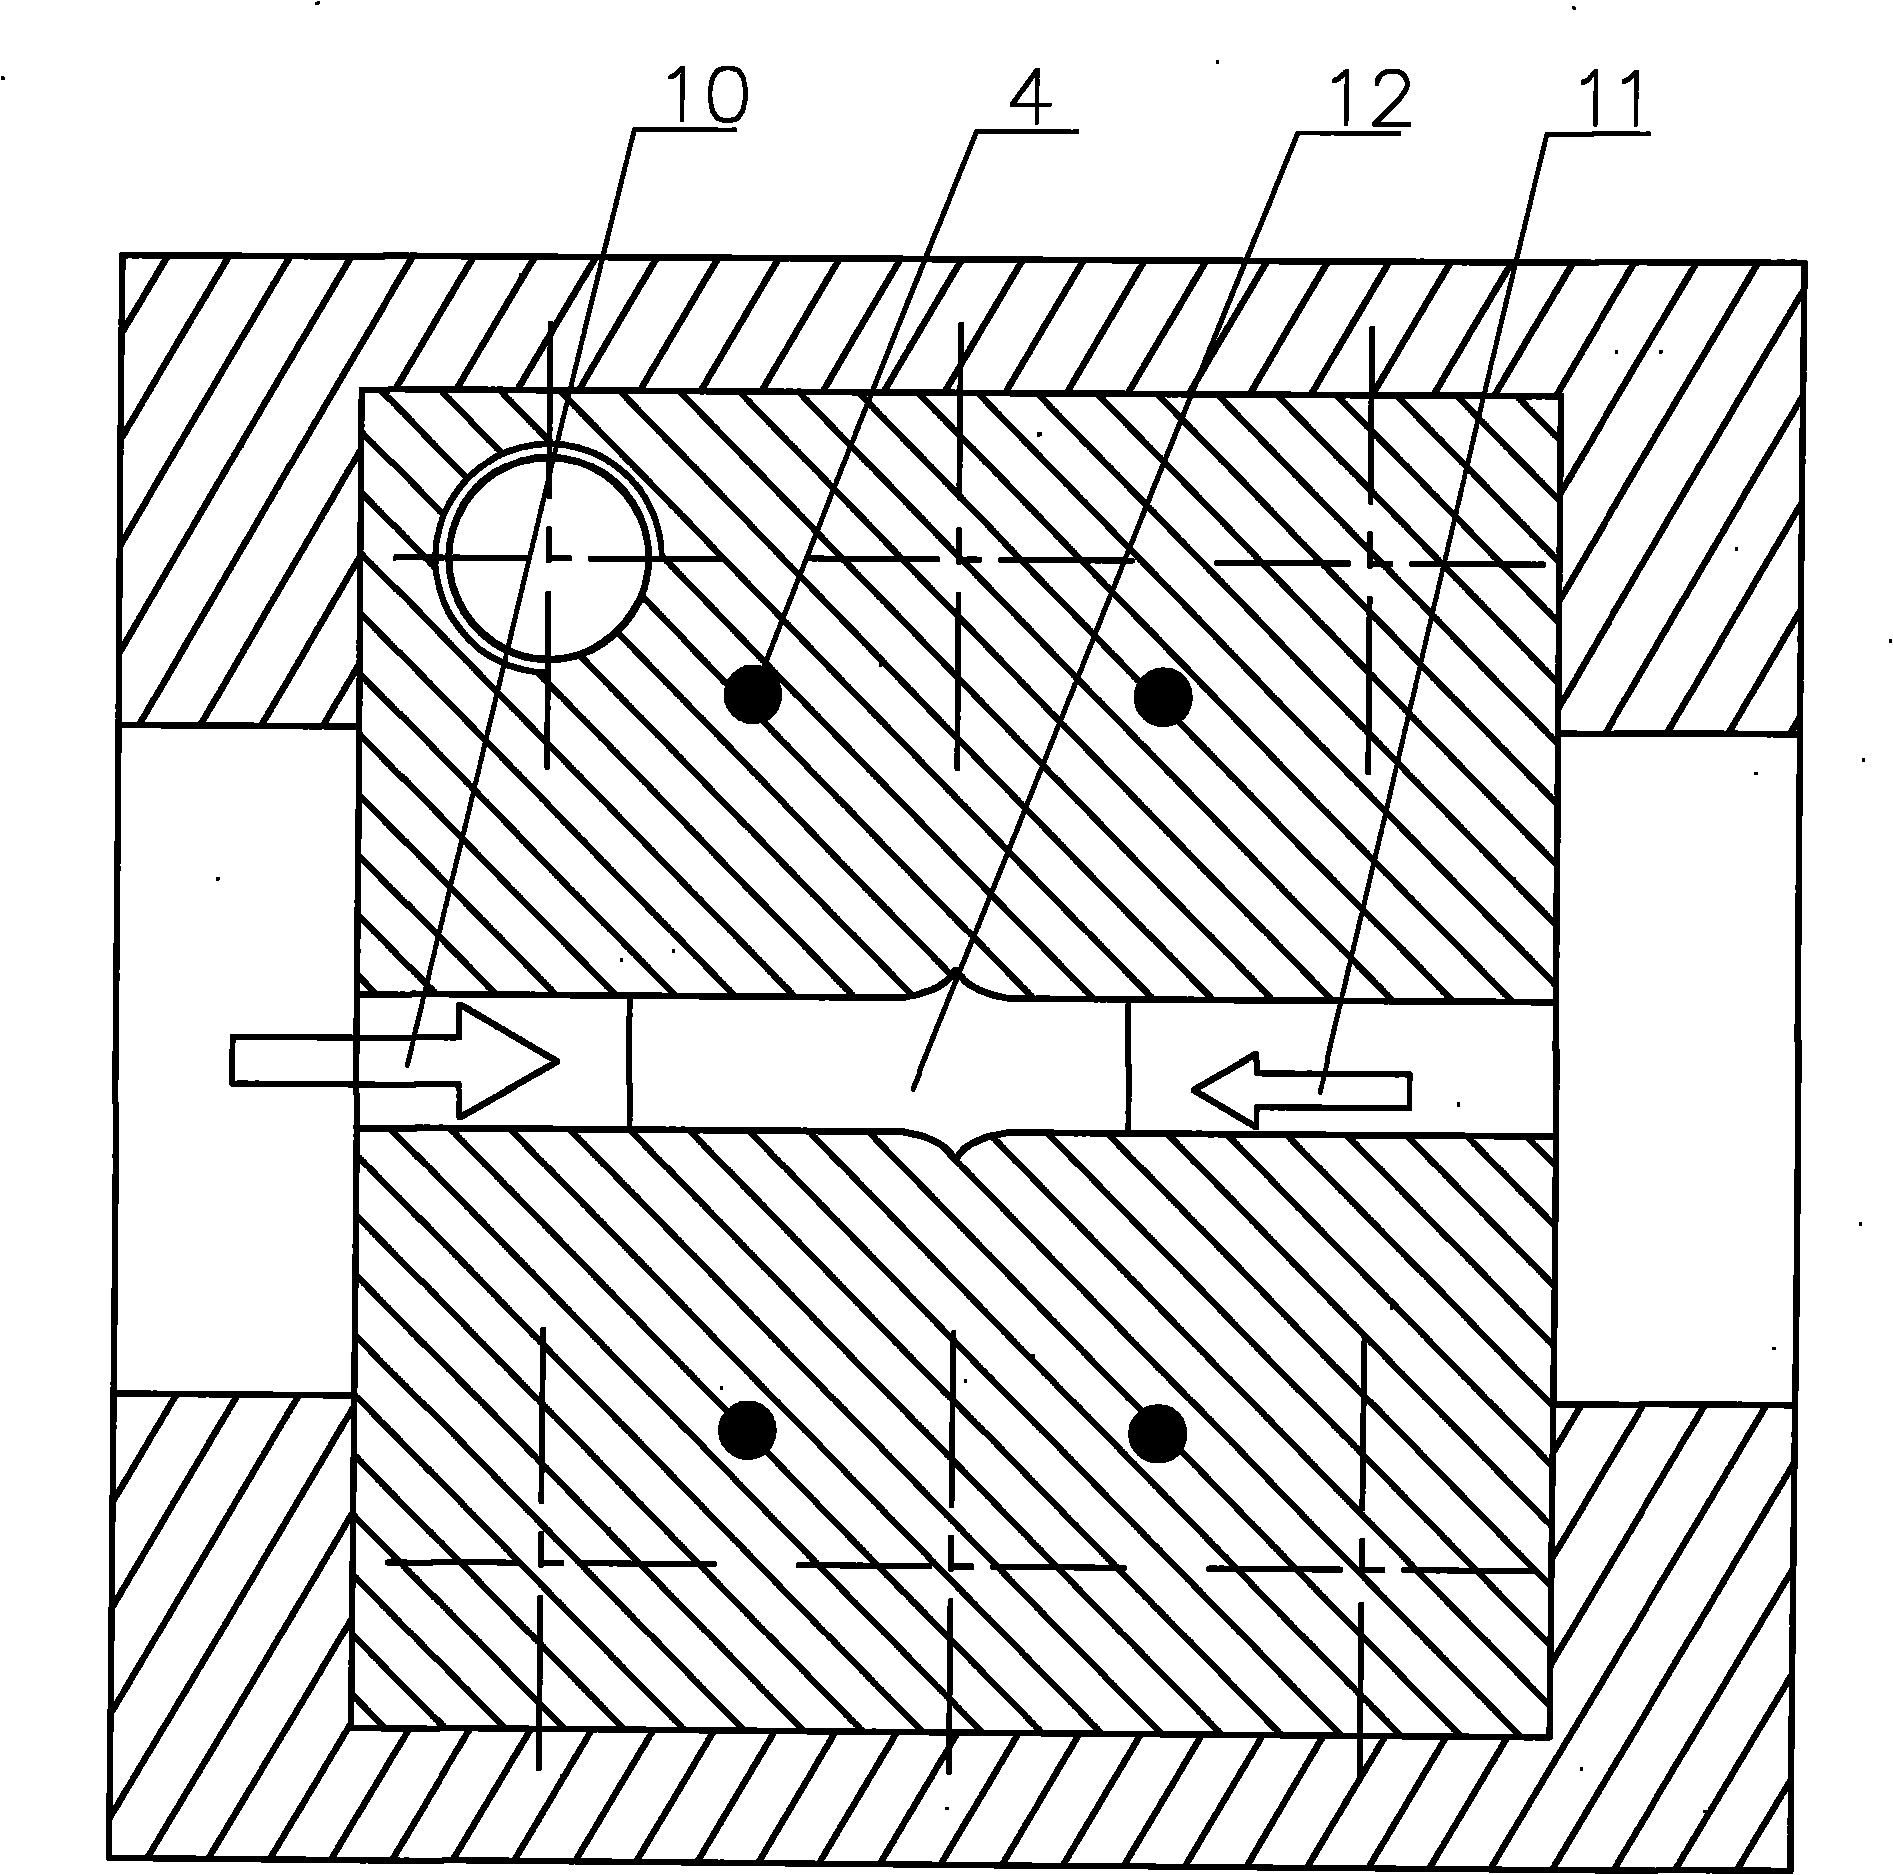 Extrusion die with an equal-passage spiral cavity for molding magnesium alloy square rods and extrusion method